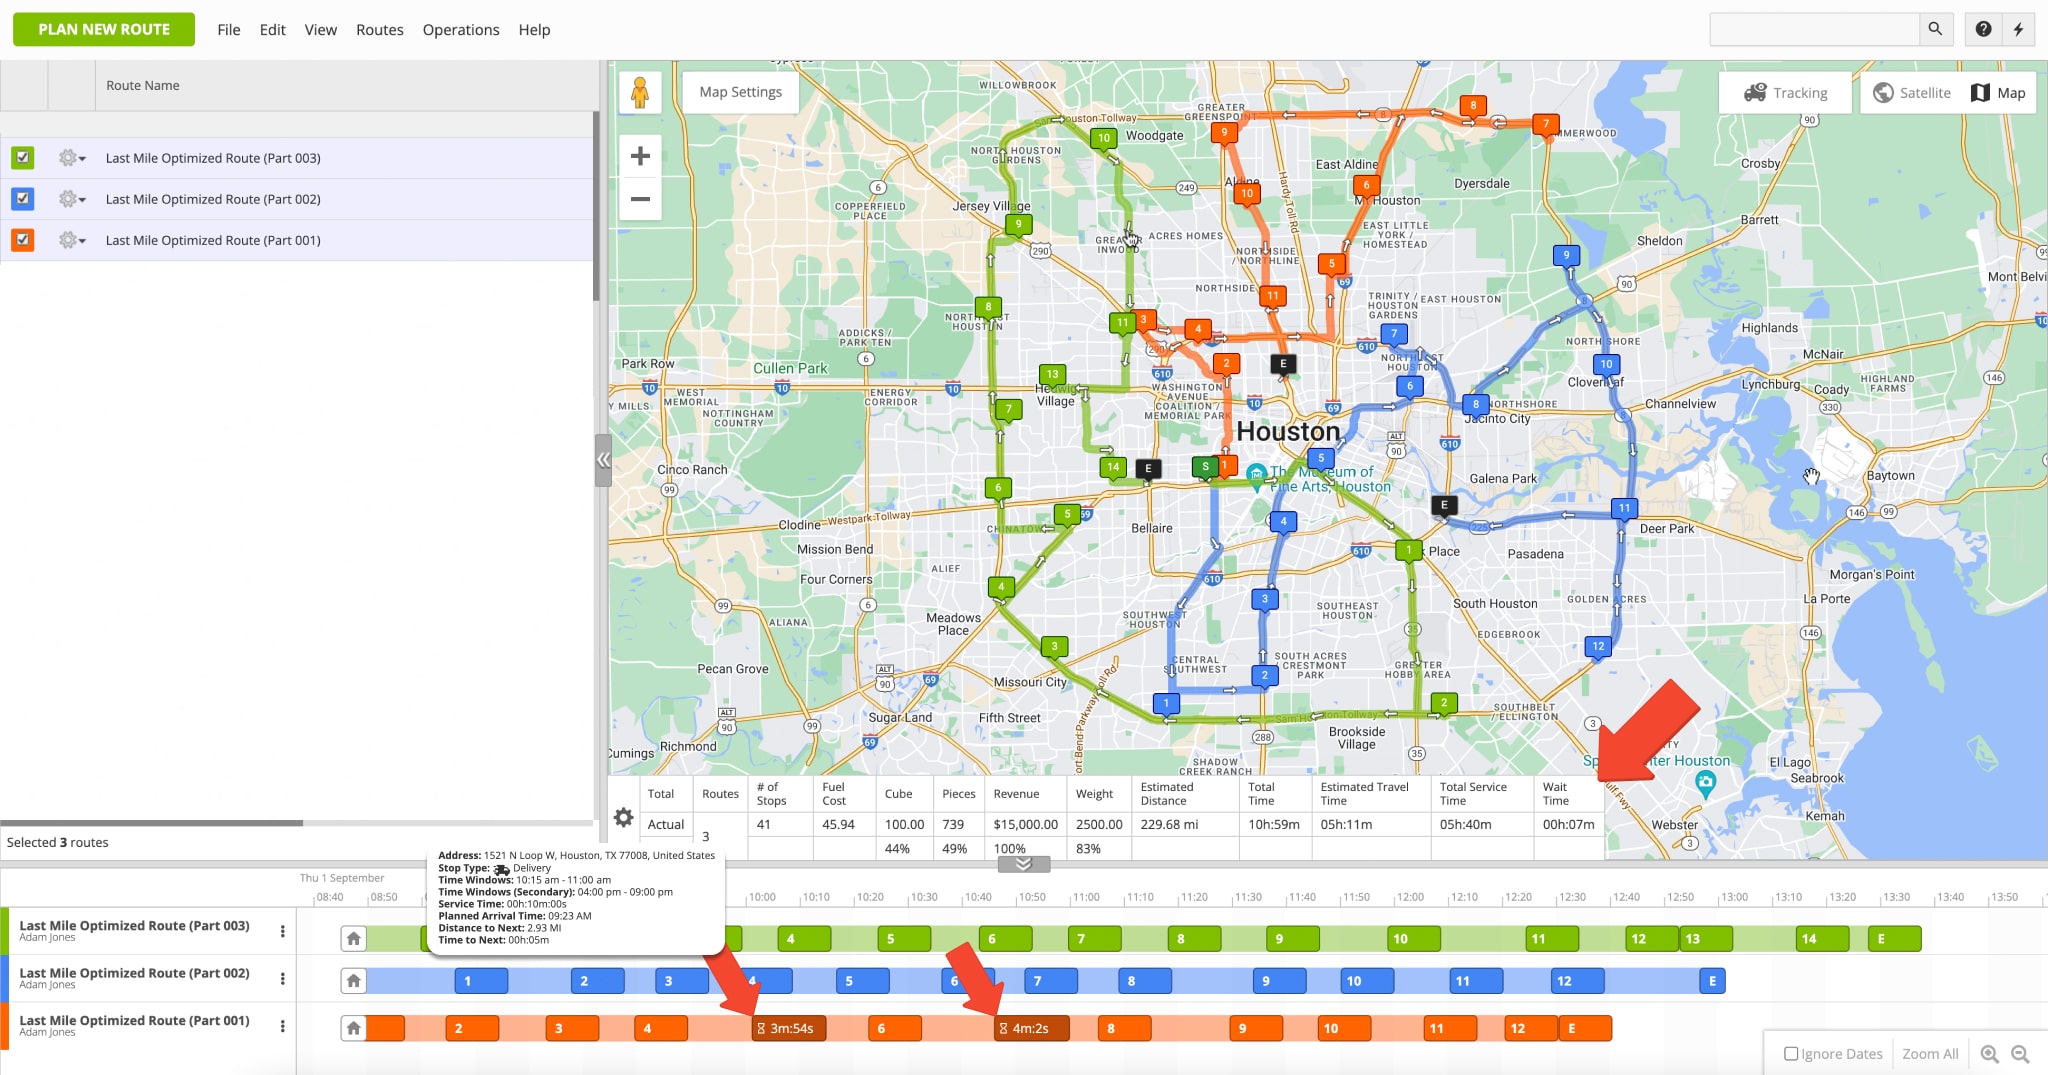 Optimized last mile routes with wait time between route stops due to the differences in customers' Time Windows.